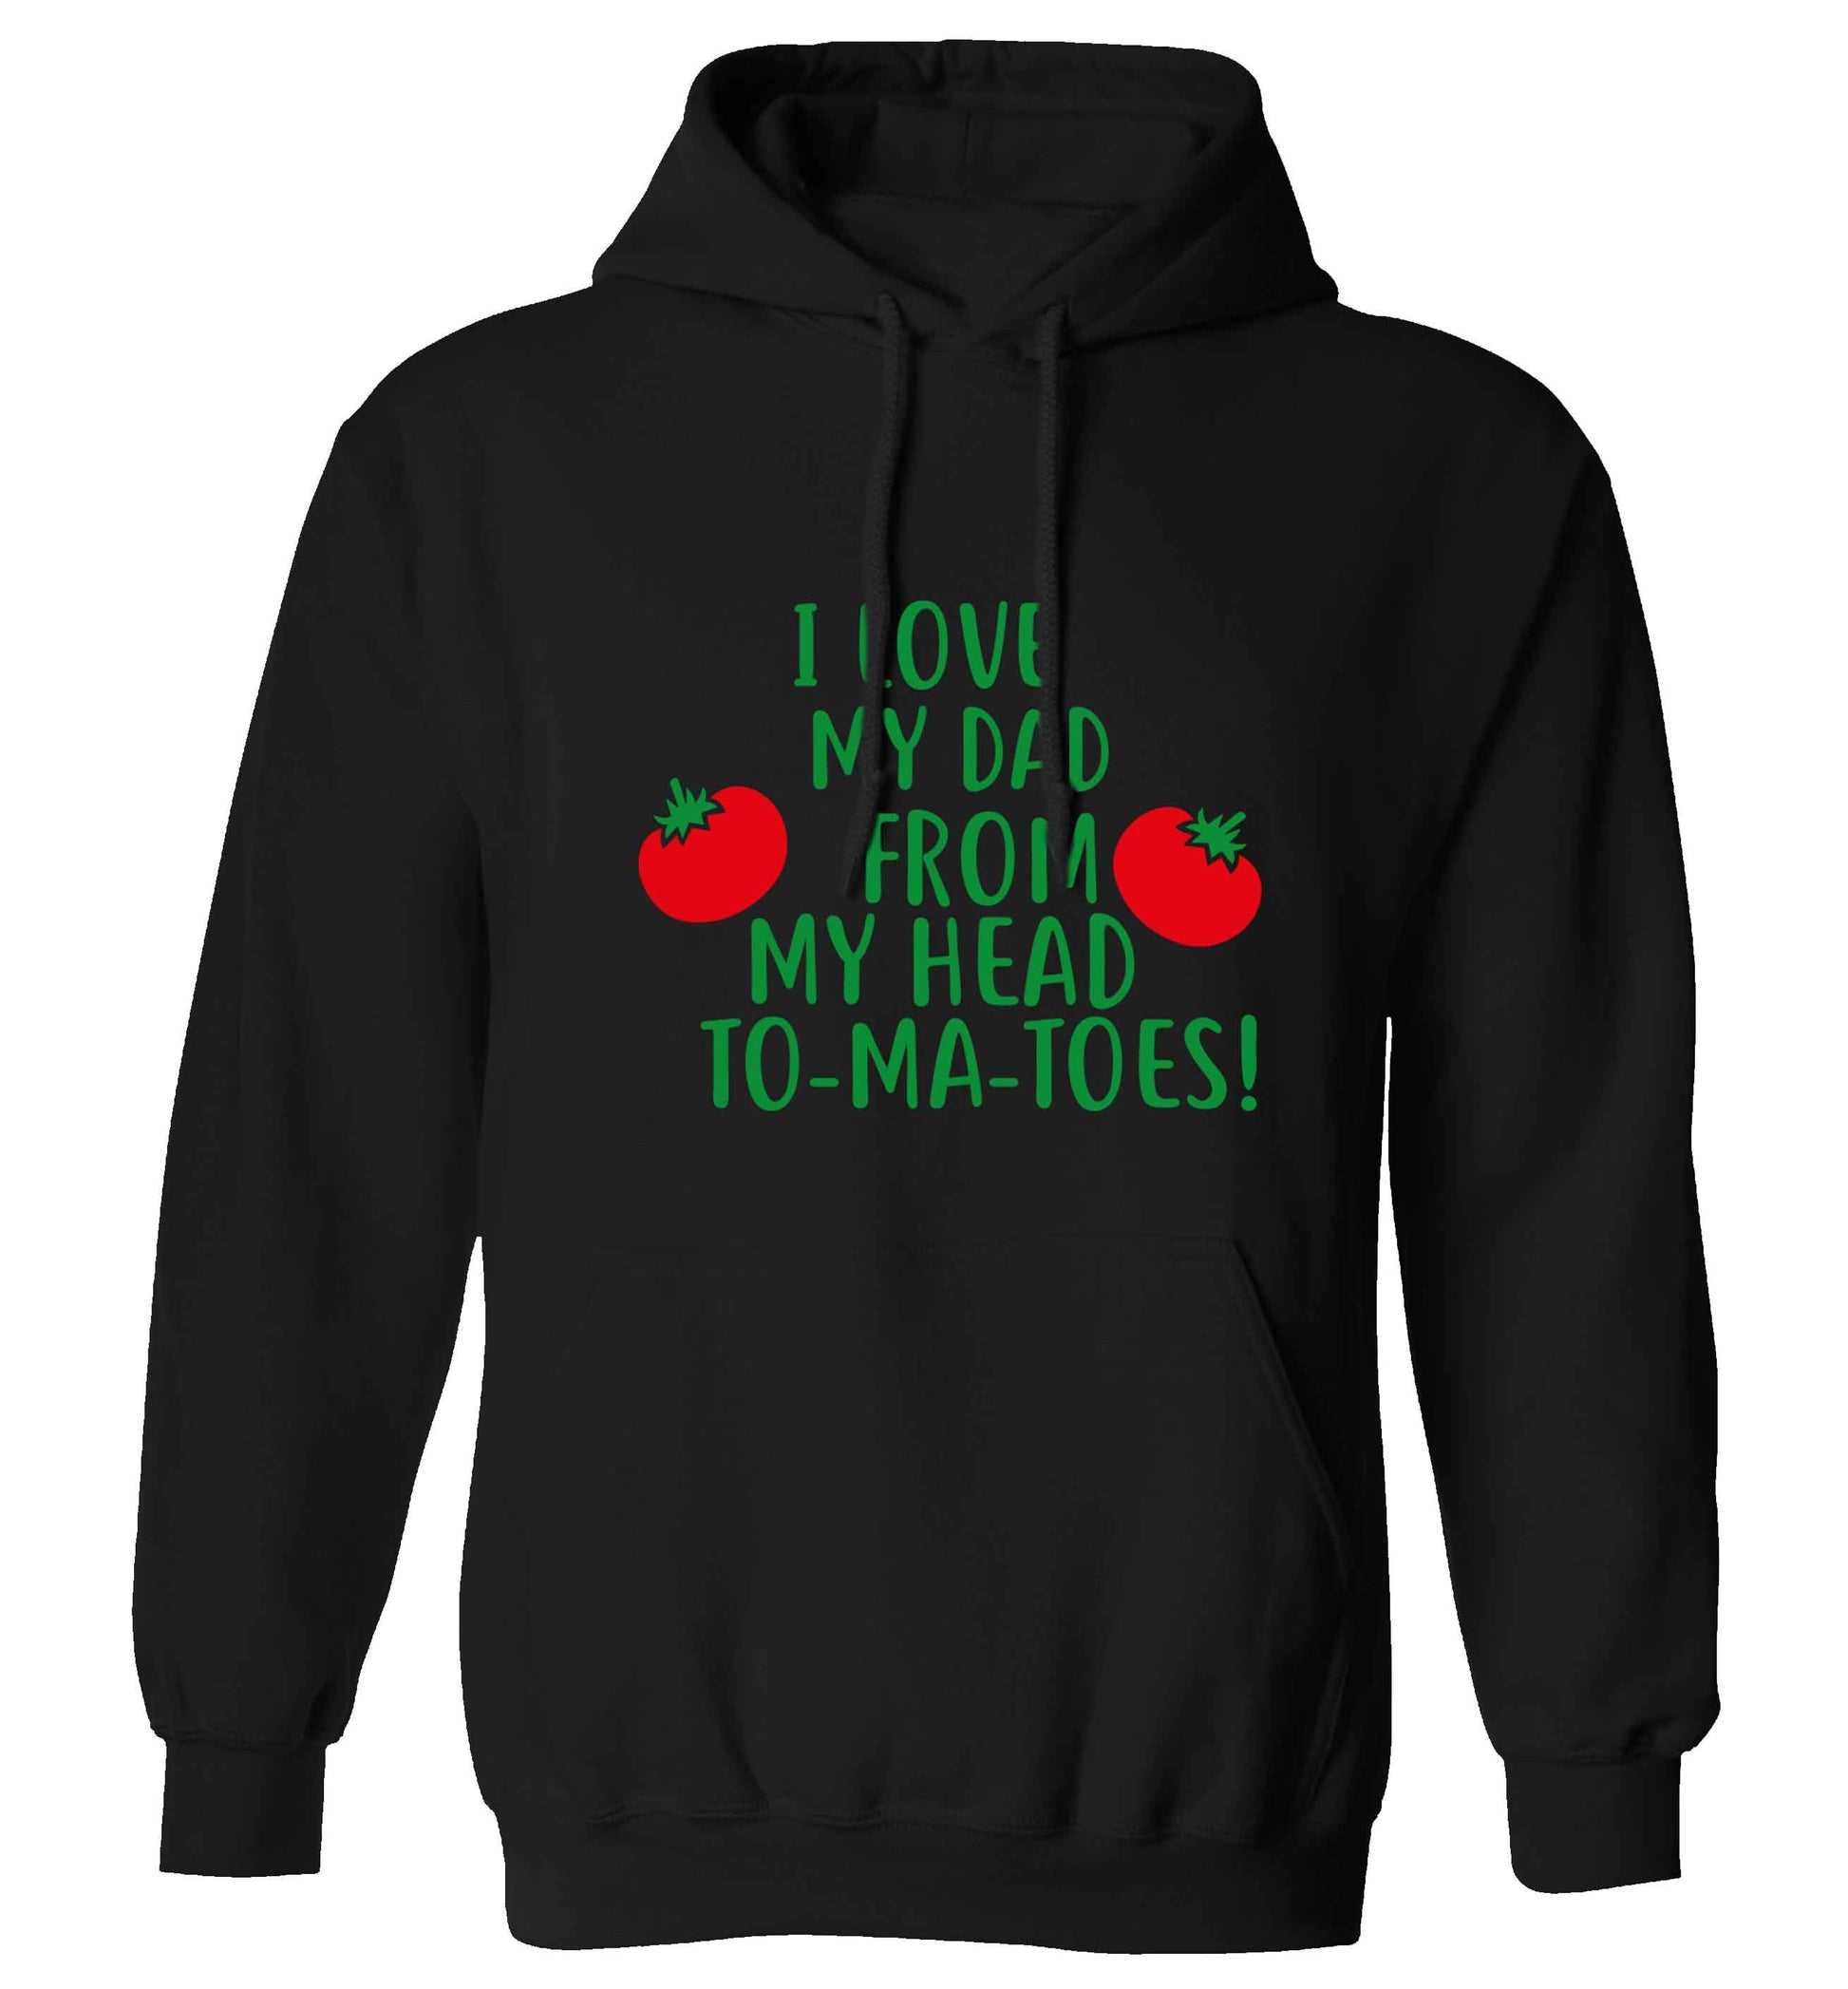 I love my dad from my head to-ma-toes adults unisex black hoodie 2XL